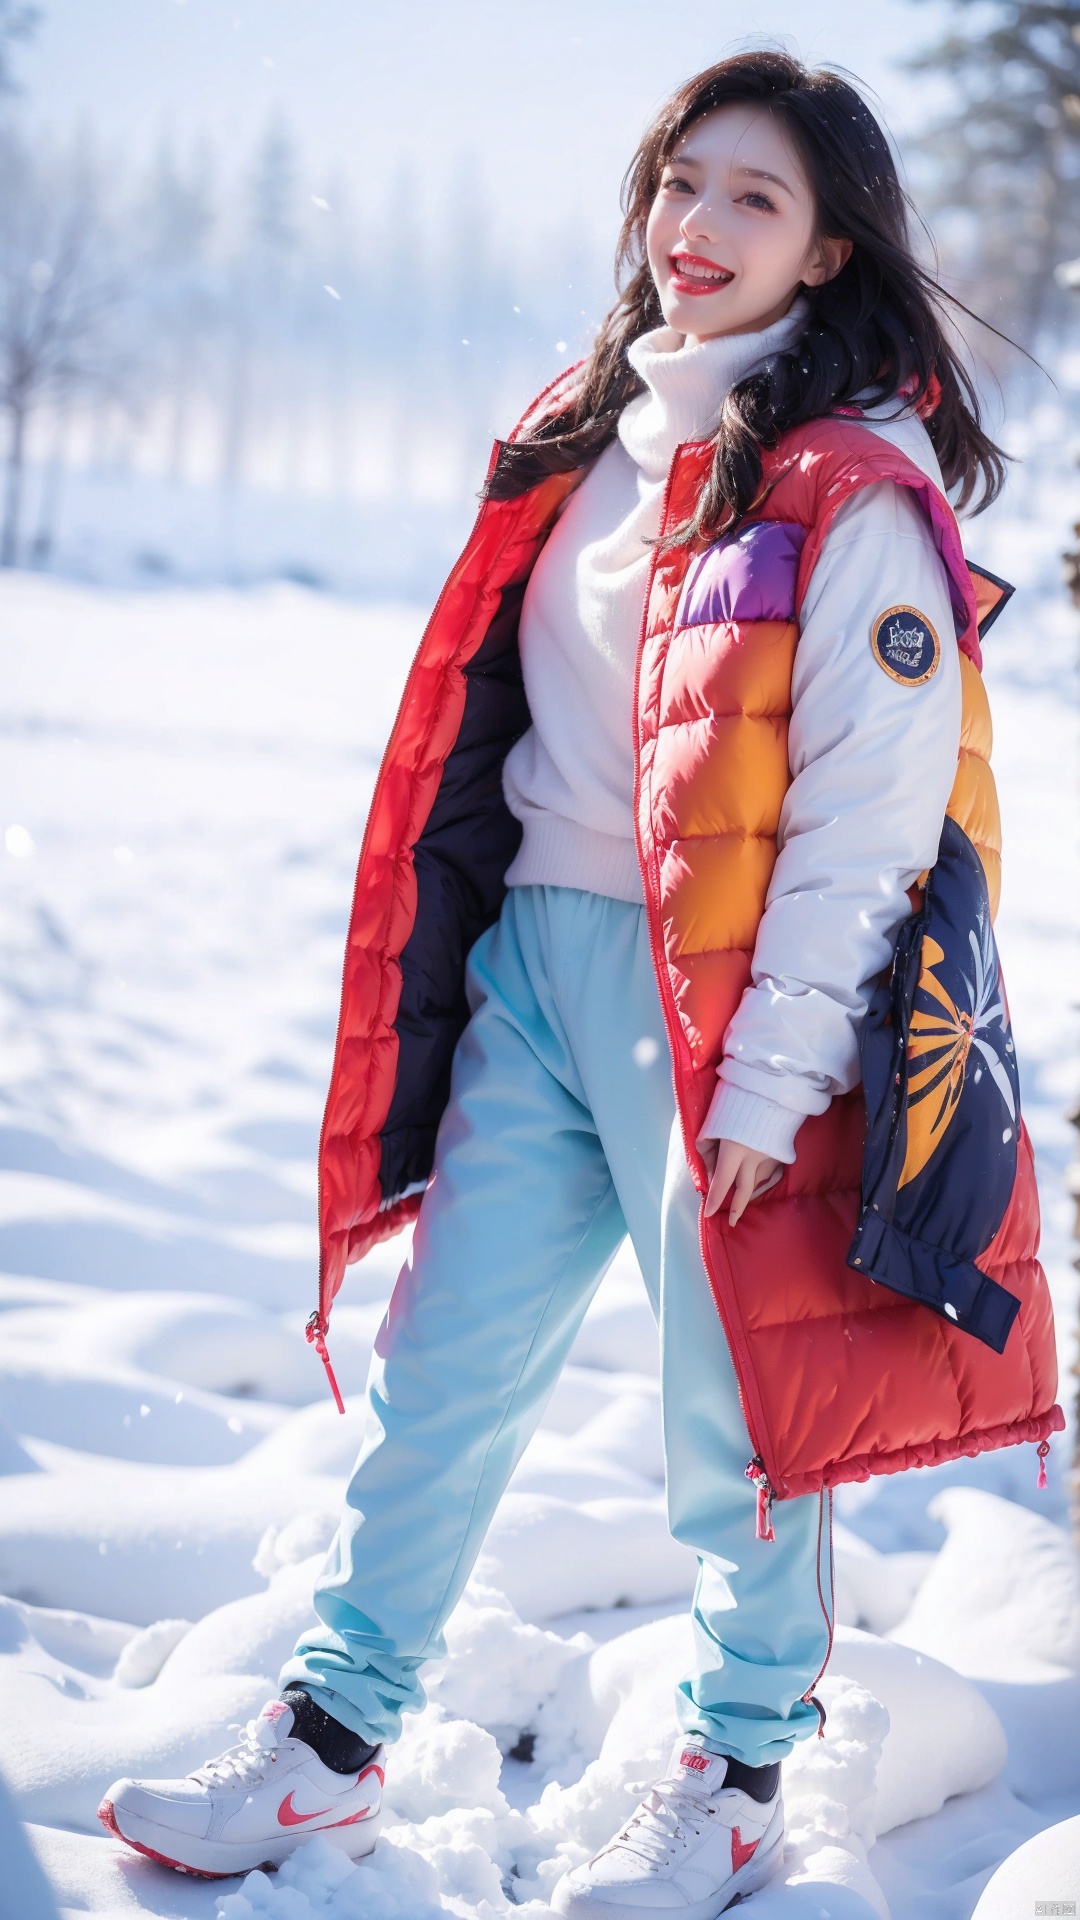  (Masterpiece), (Ultra High Resolution), a girl with long hair are joyfully dancing in heavy snow. (((colourful down jacket:1.2))), sneakers,colourful pants, Their faces are filled with happy smiles, and snowflakes are falling on their hair and collars. The surrounding is a vast expanse of white snow, only their footprints disturbing the purity. Snowflakes in the sky fall like cotton candy, adding a touch of sweetness to this winter scene. This is a vibrant and joyful winter afternoon. 
, Fashion Style,jellyfishforest